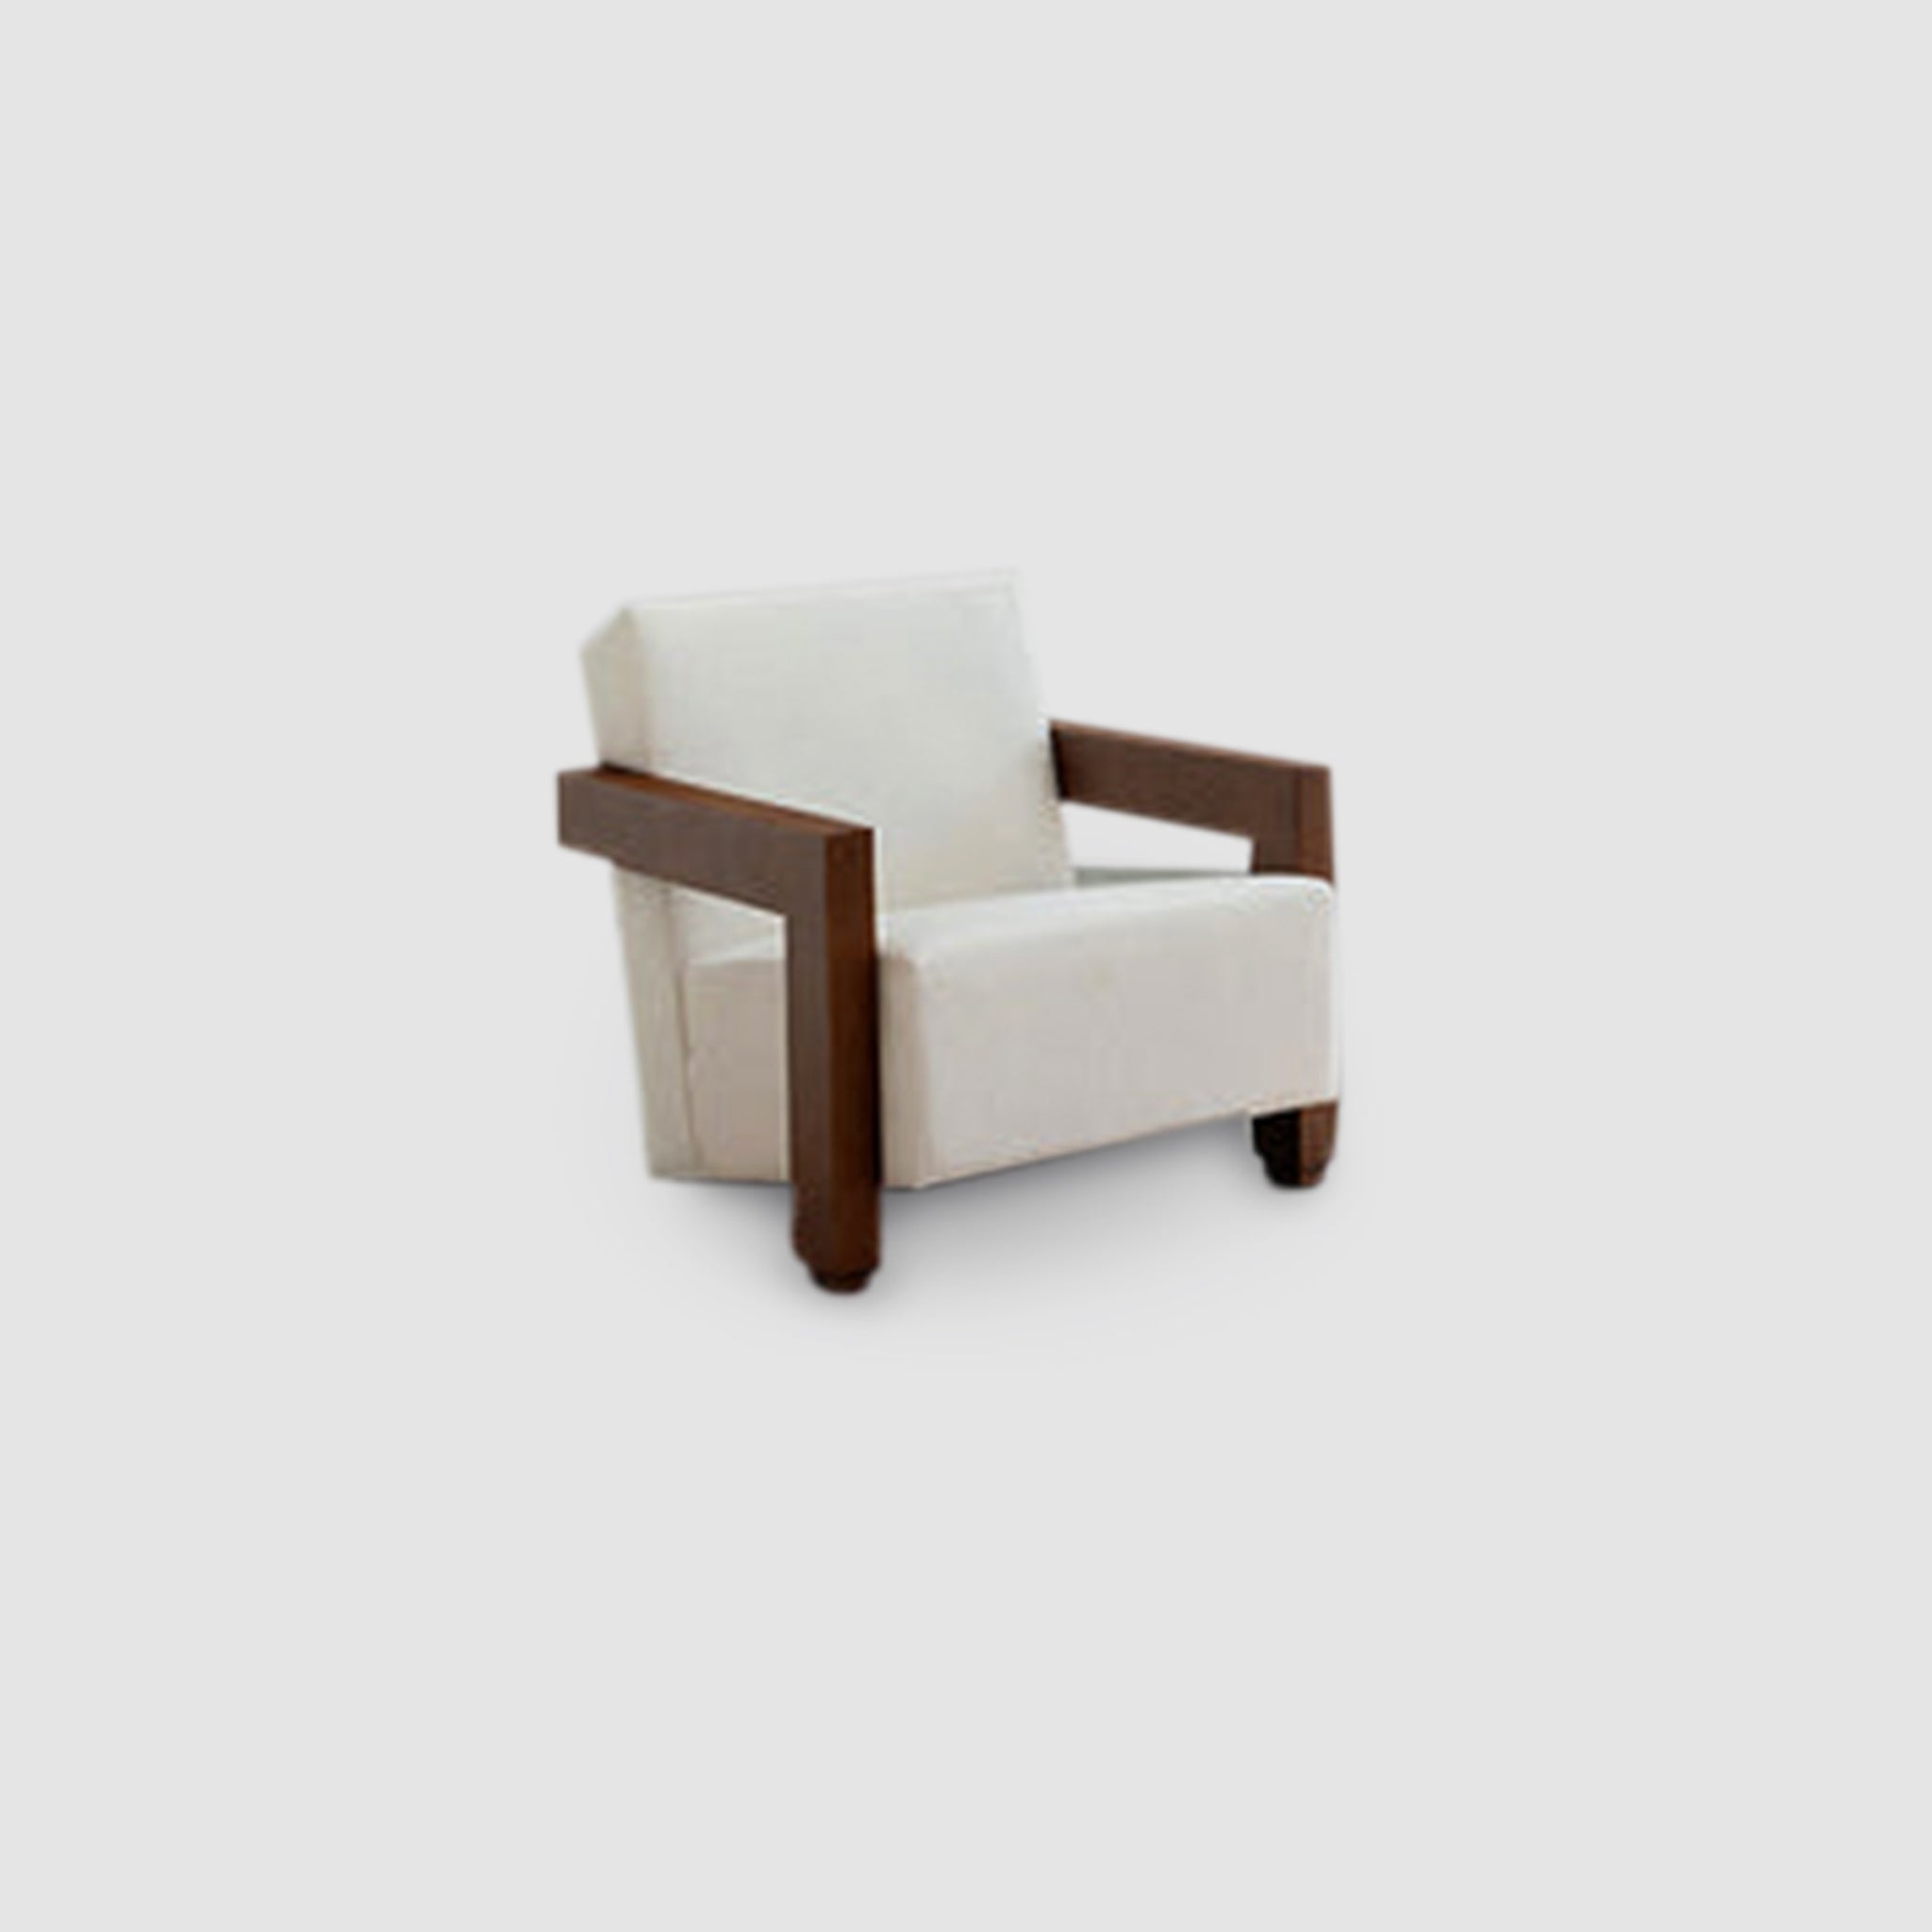 Angled view of The Gerrit Accent Chair featuring white upholstery and robust wooden armrests, set against a plain background.